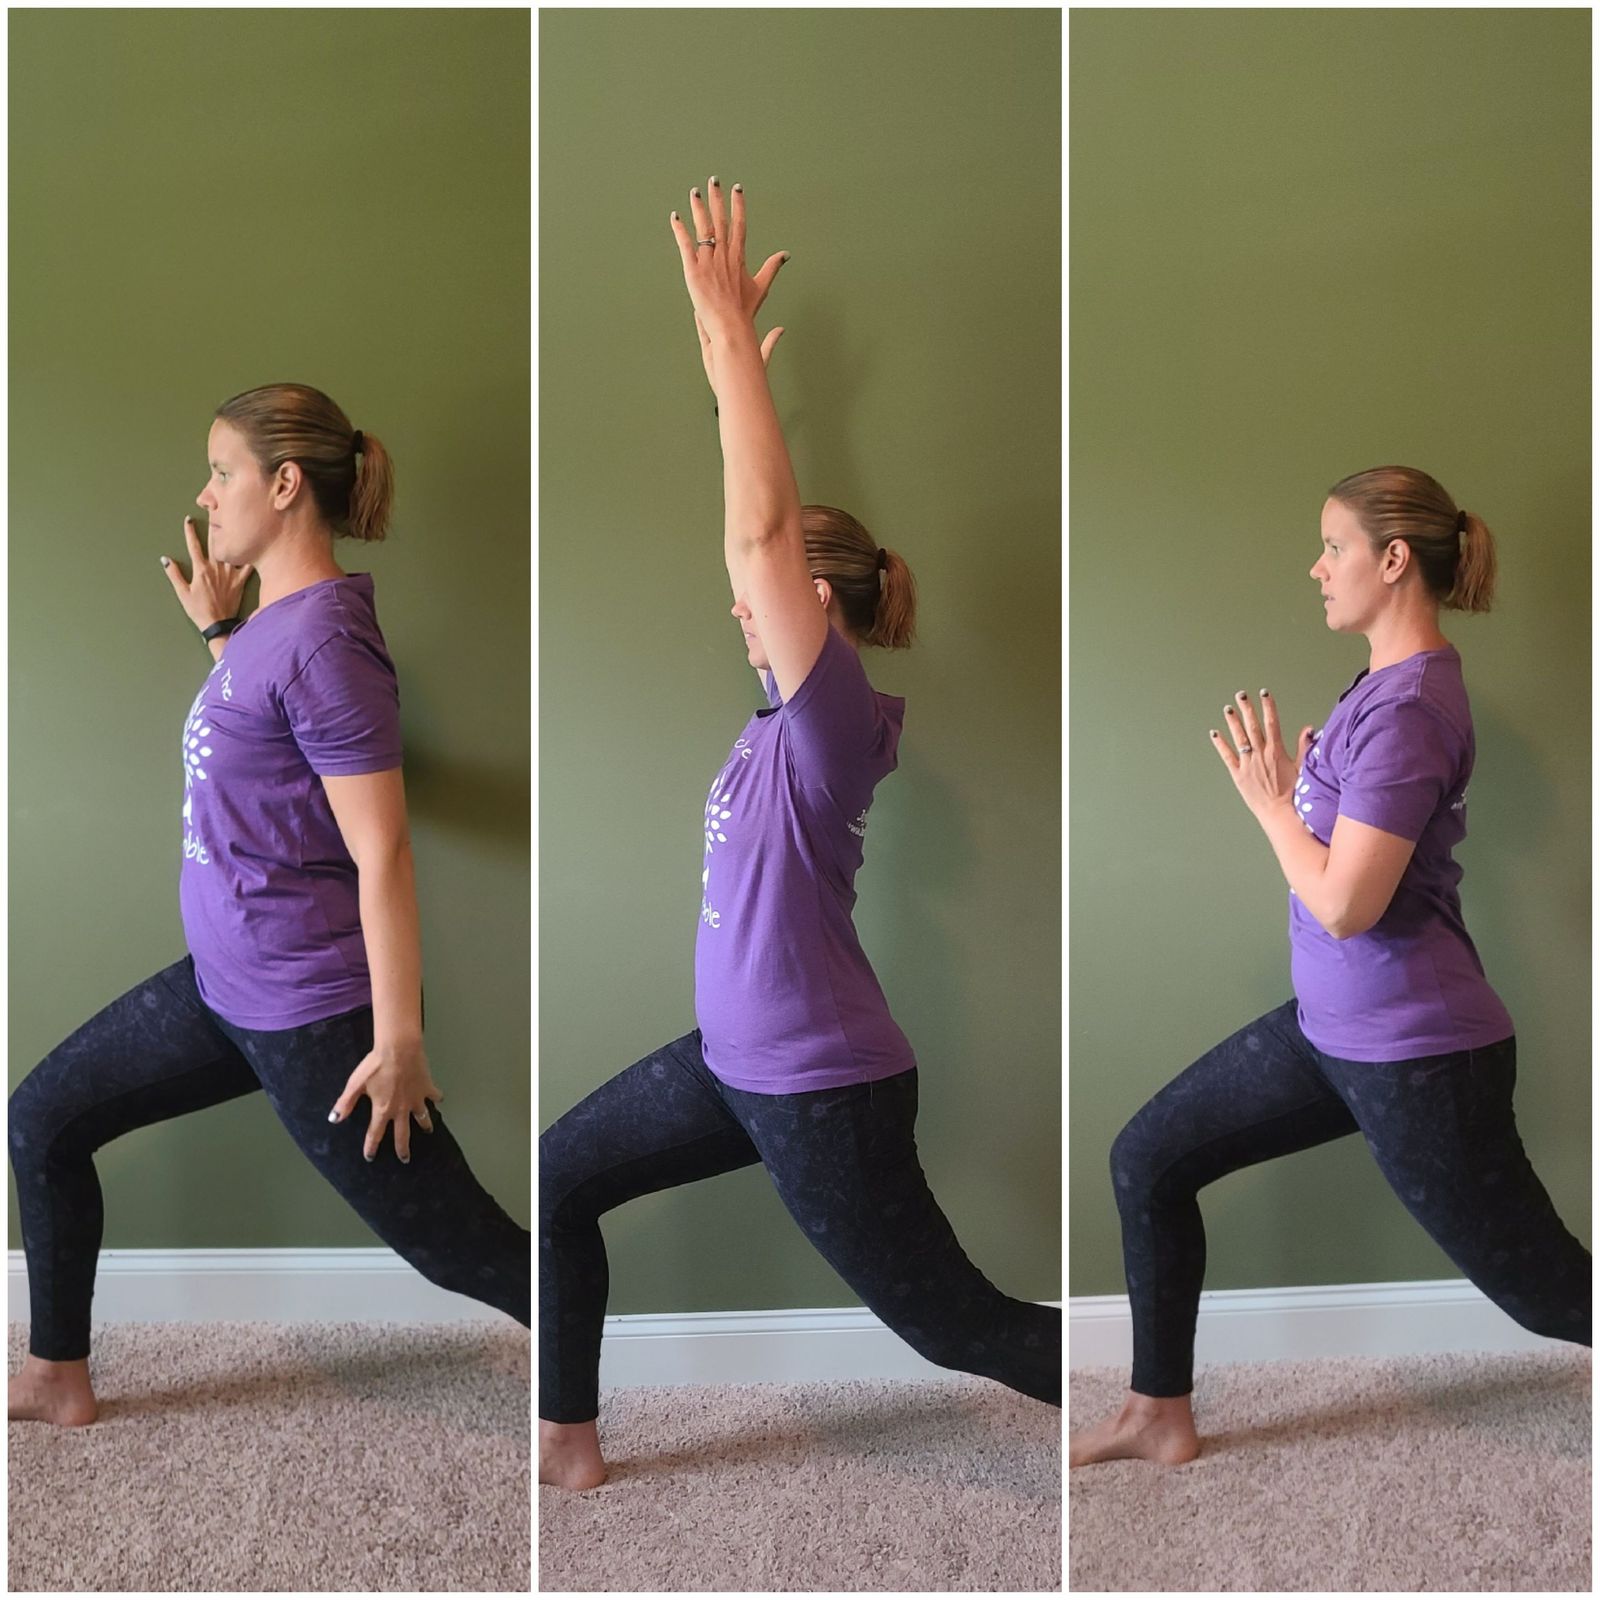 Toe Stand - This posture will help develop balance and stillness. It  stretches and strengthens the feet, legs, knees, hips, abdomen, and lower  back., By Yogafreak studio